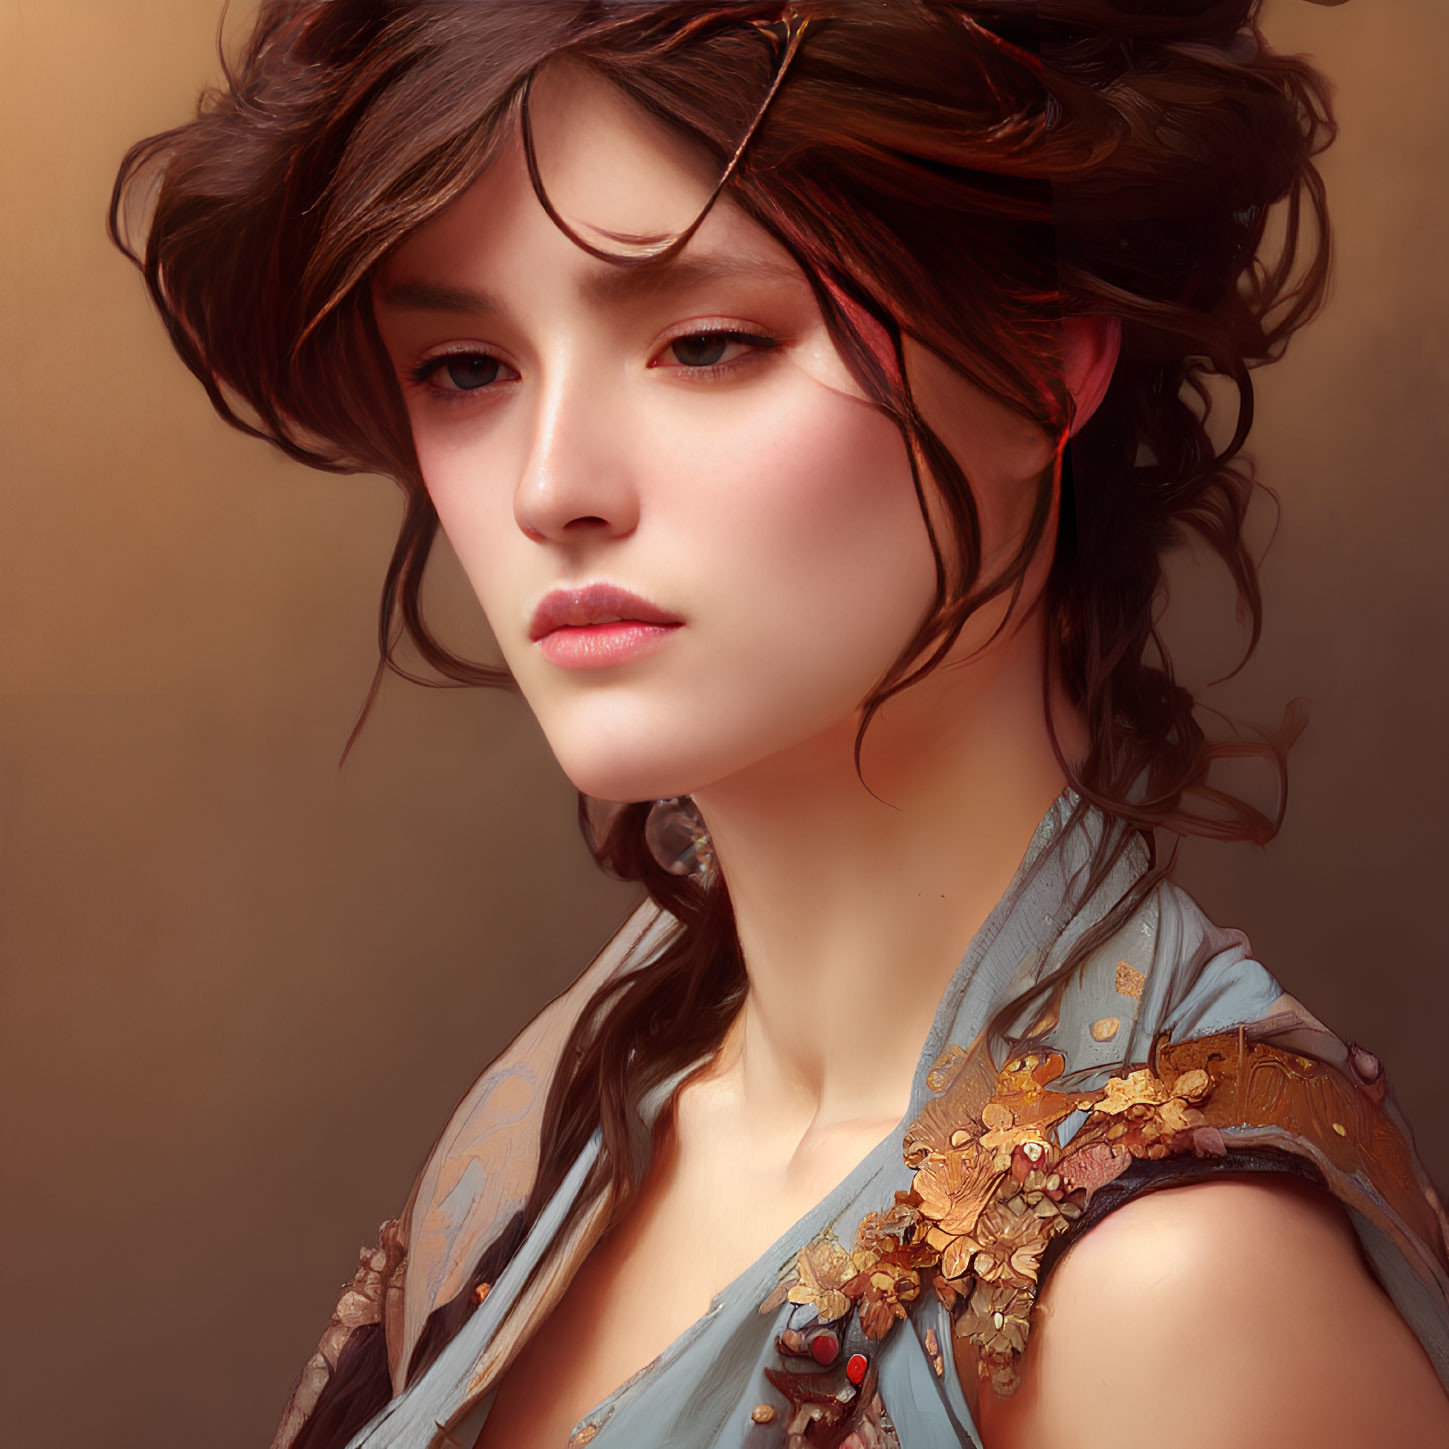 Digital portrait of a woman with flowing hair and embellished garment on warm-toned backdrop